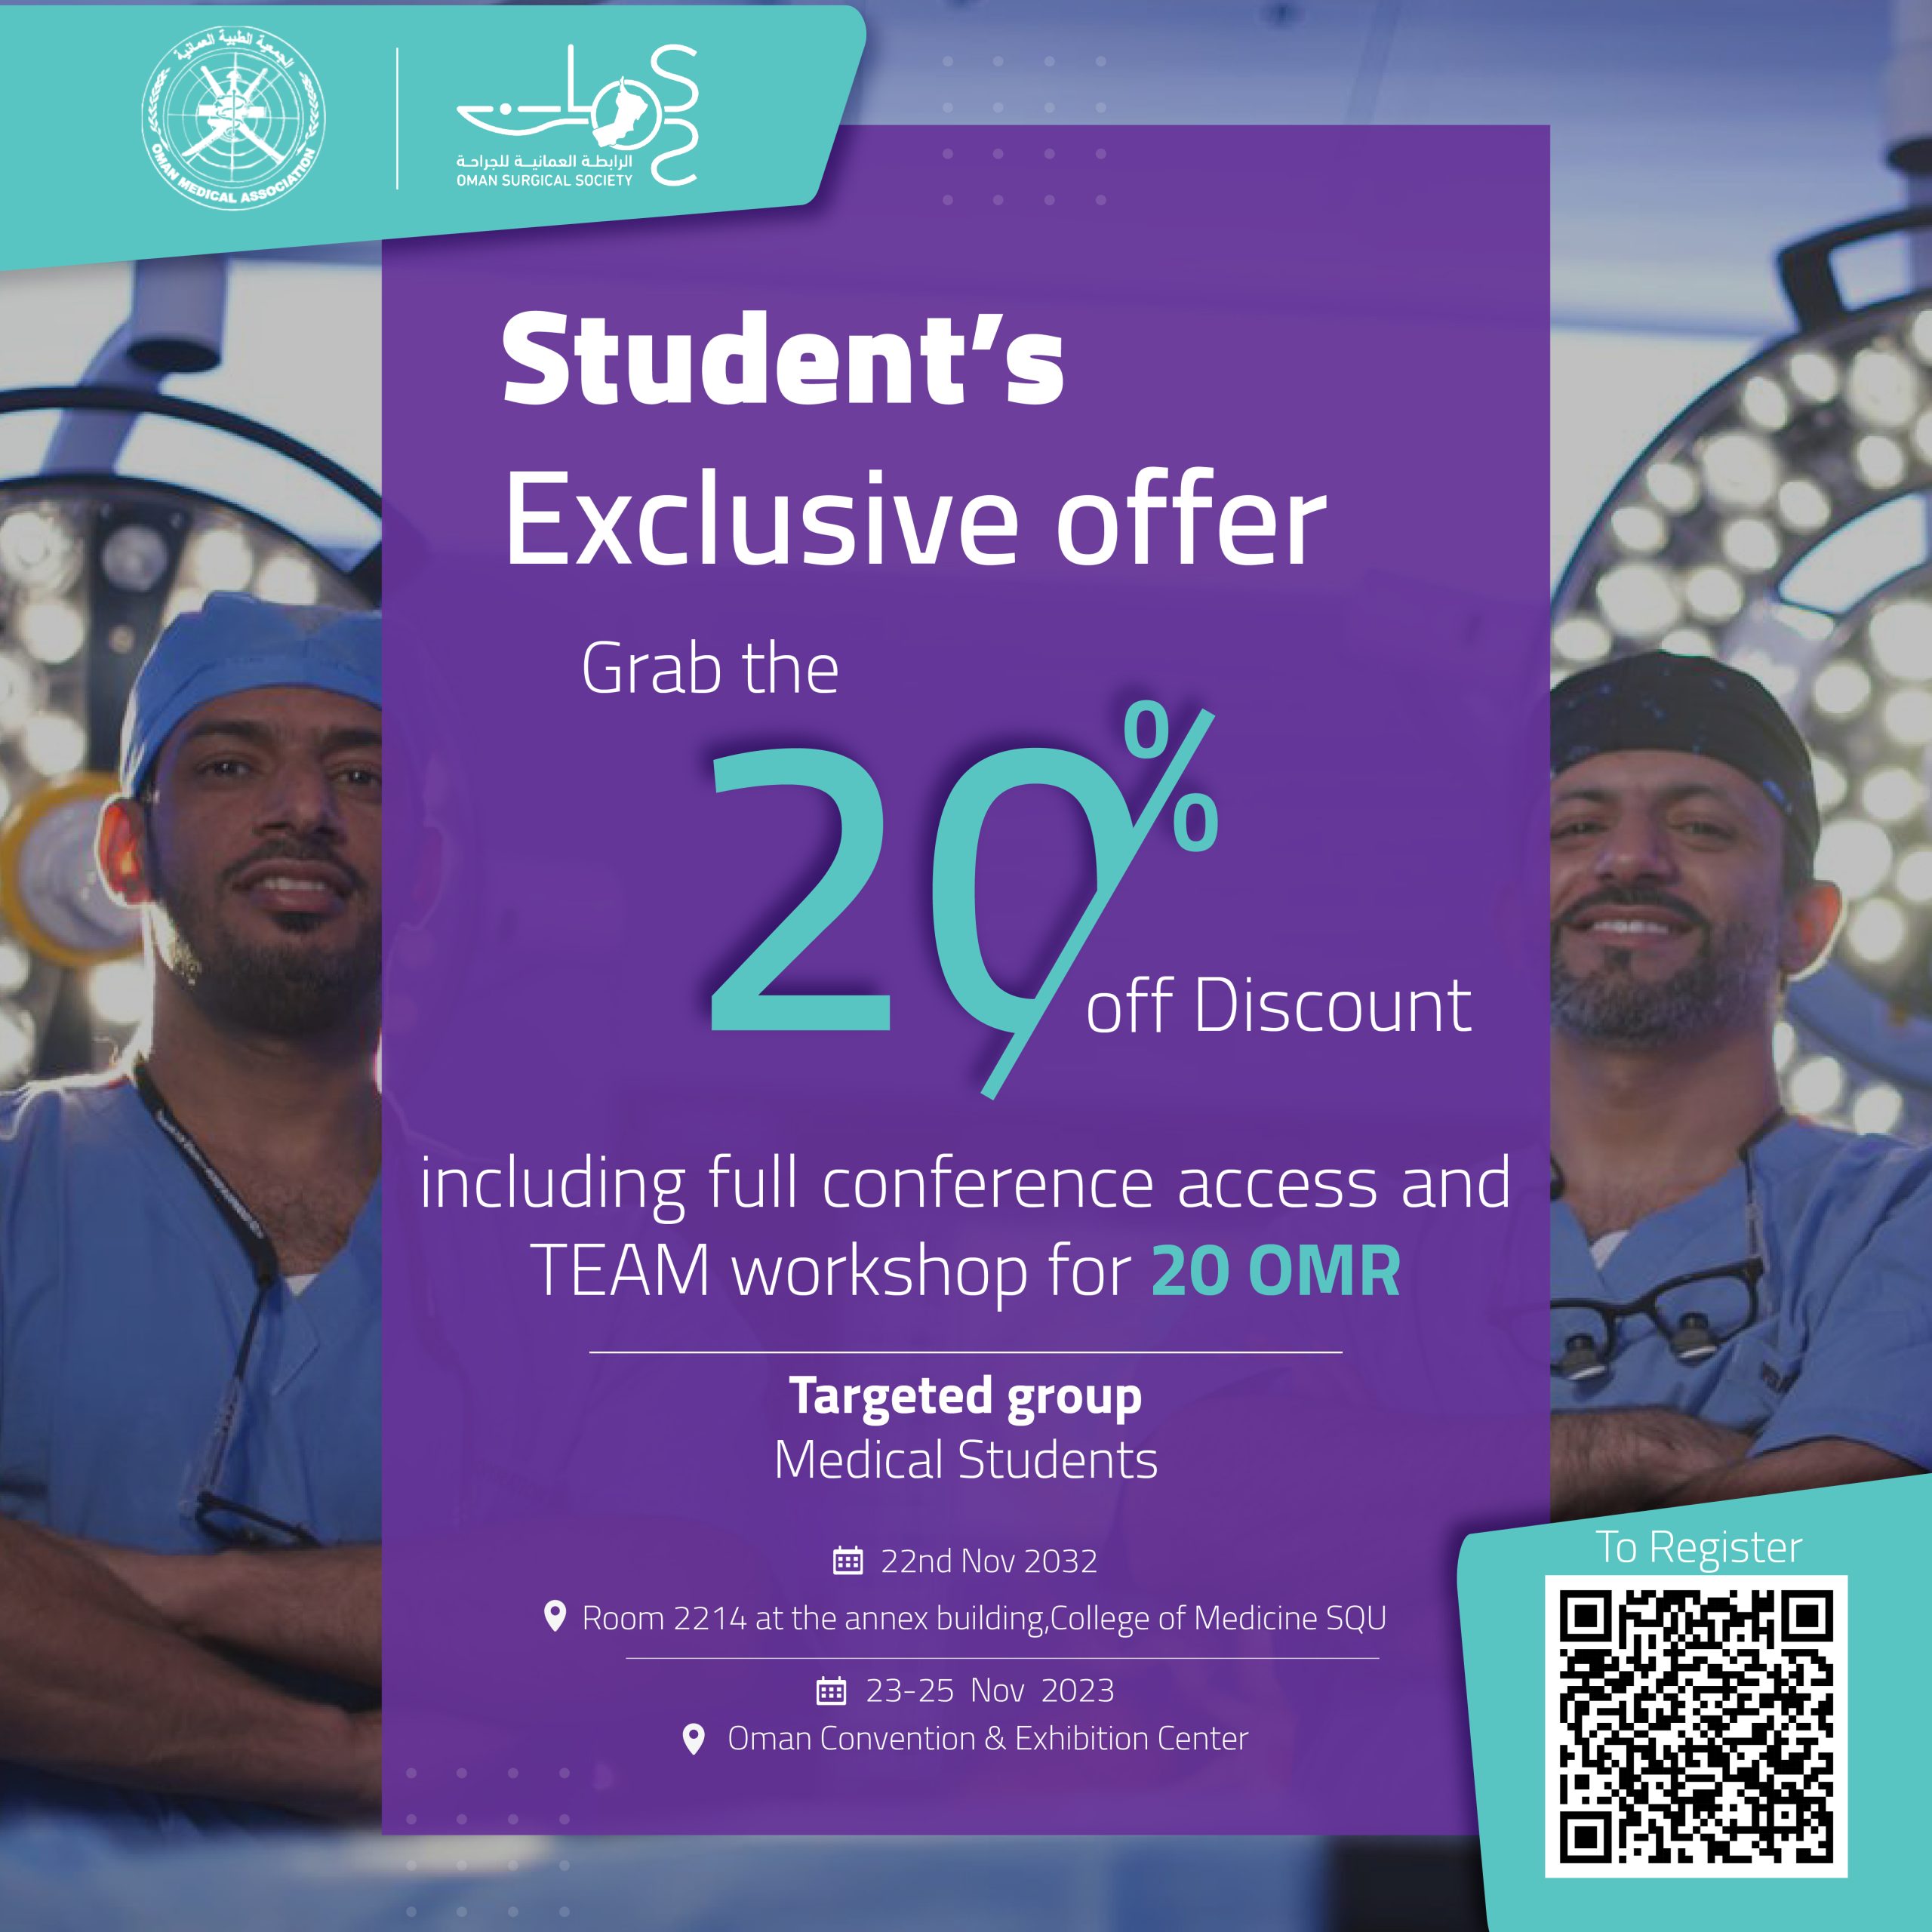 Student's offer